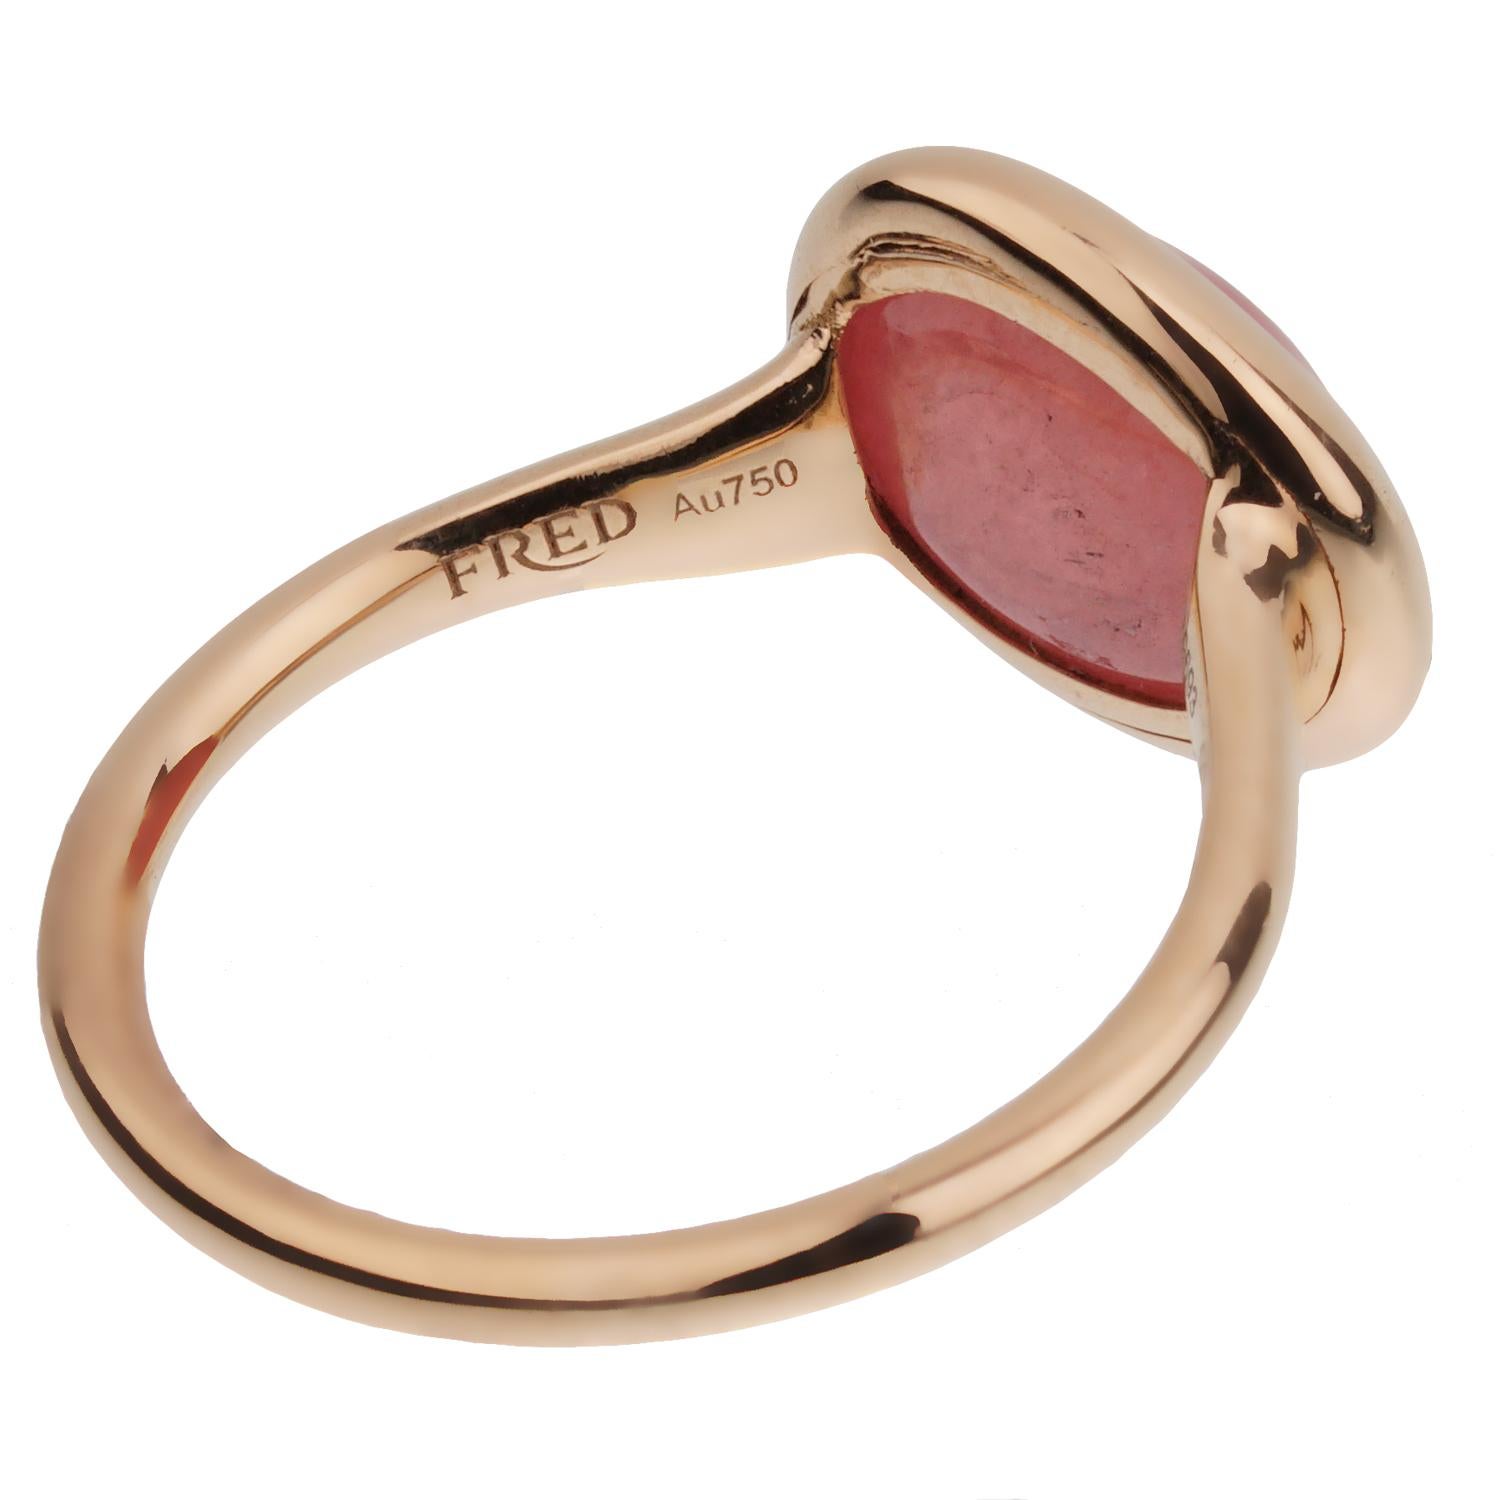 Fred of Paris 3ct Pink Quartz Cabochon Rose Gold Cocktail Ring In New Condition For Sale In Feasterville, PA